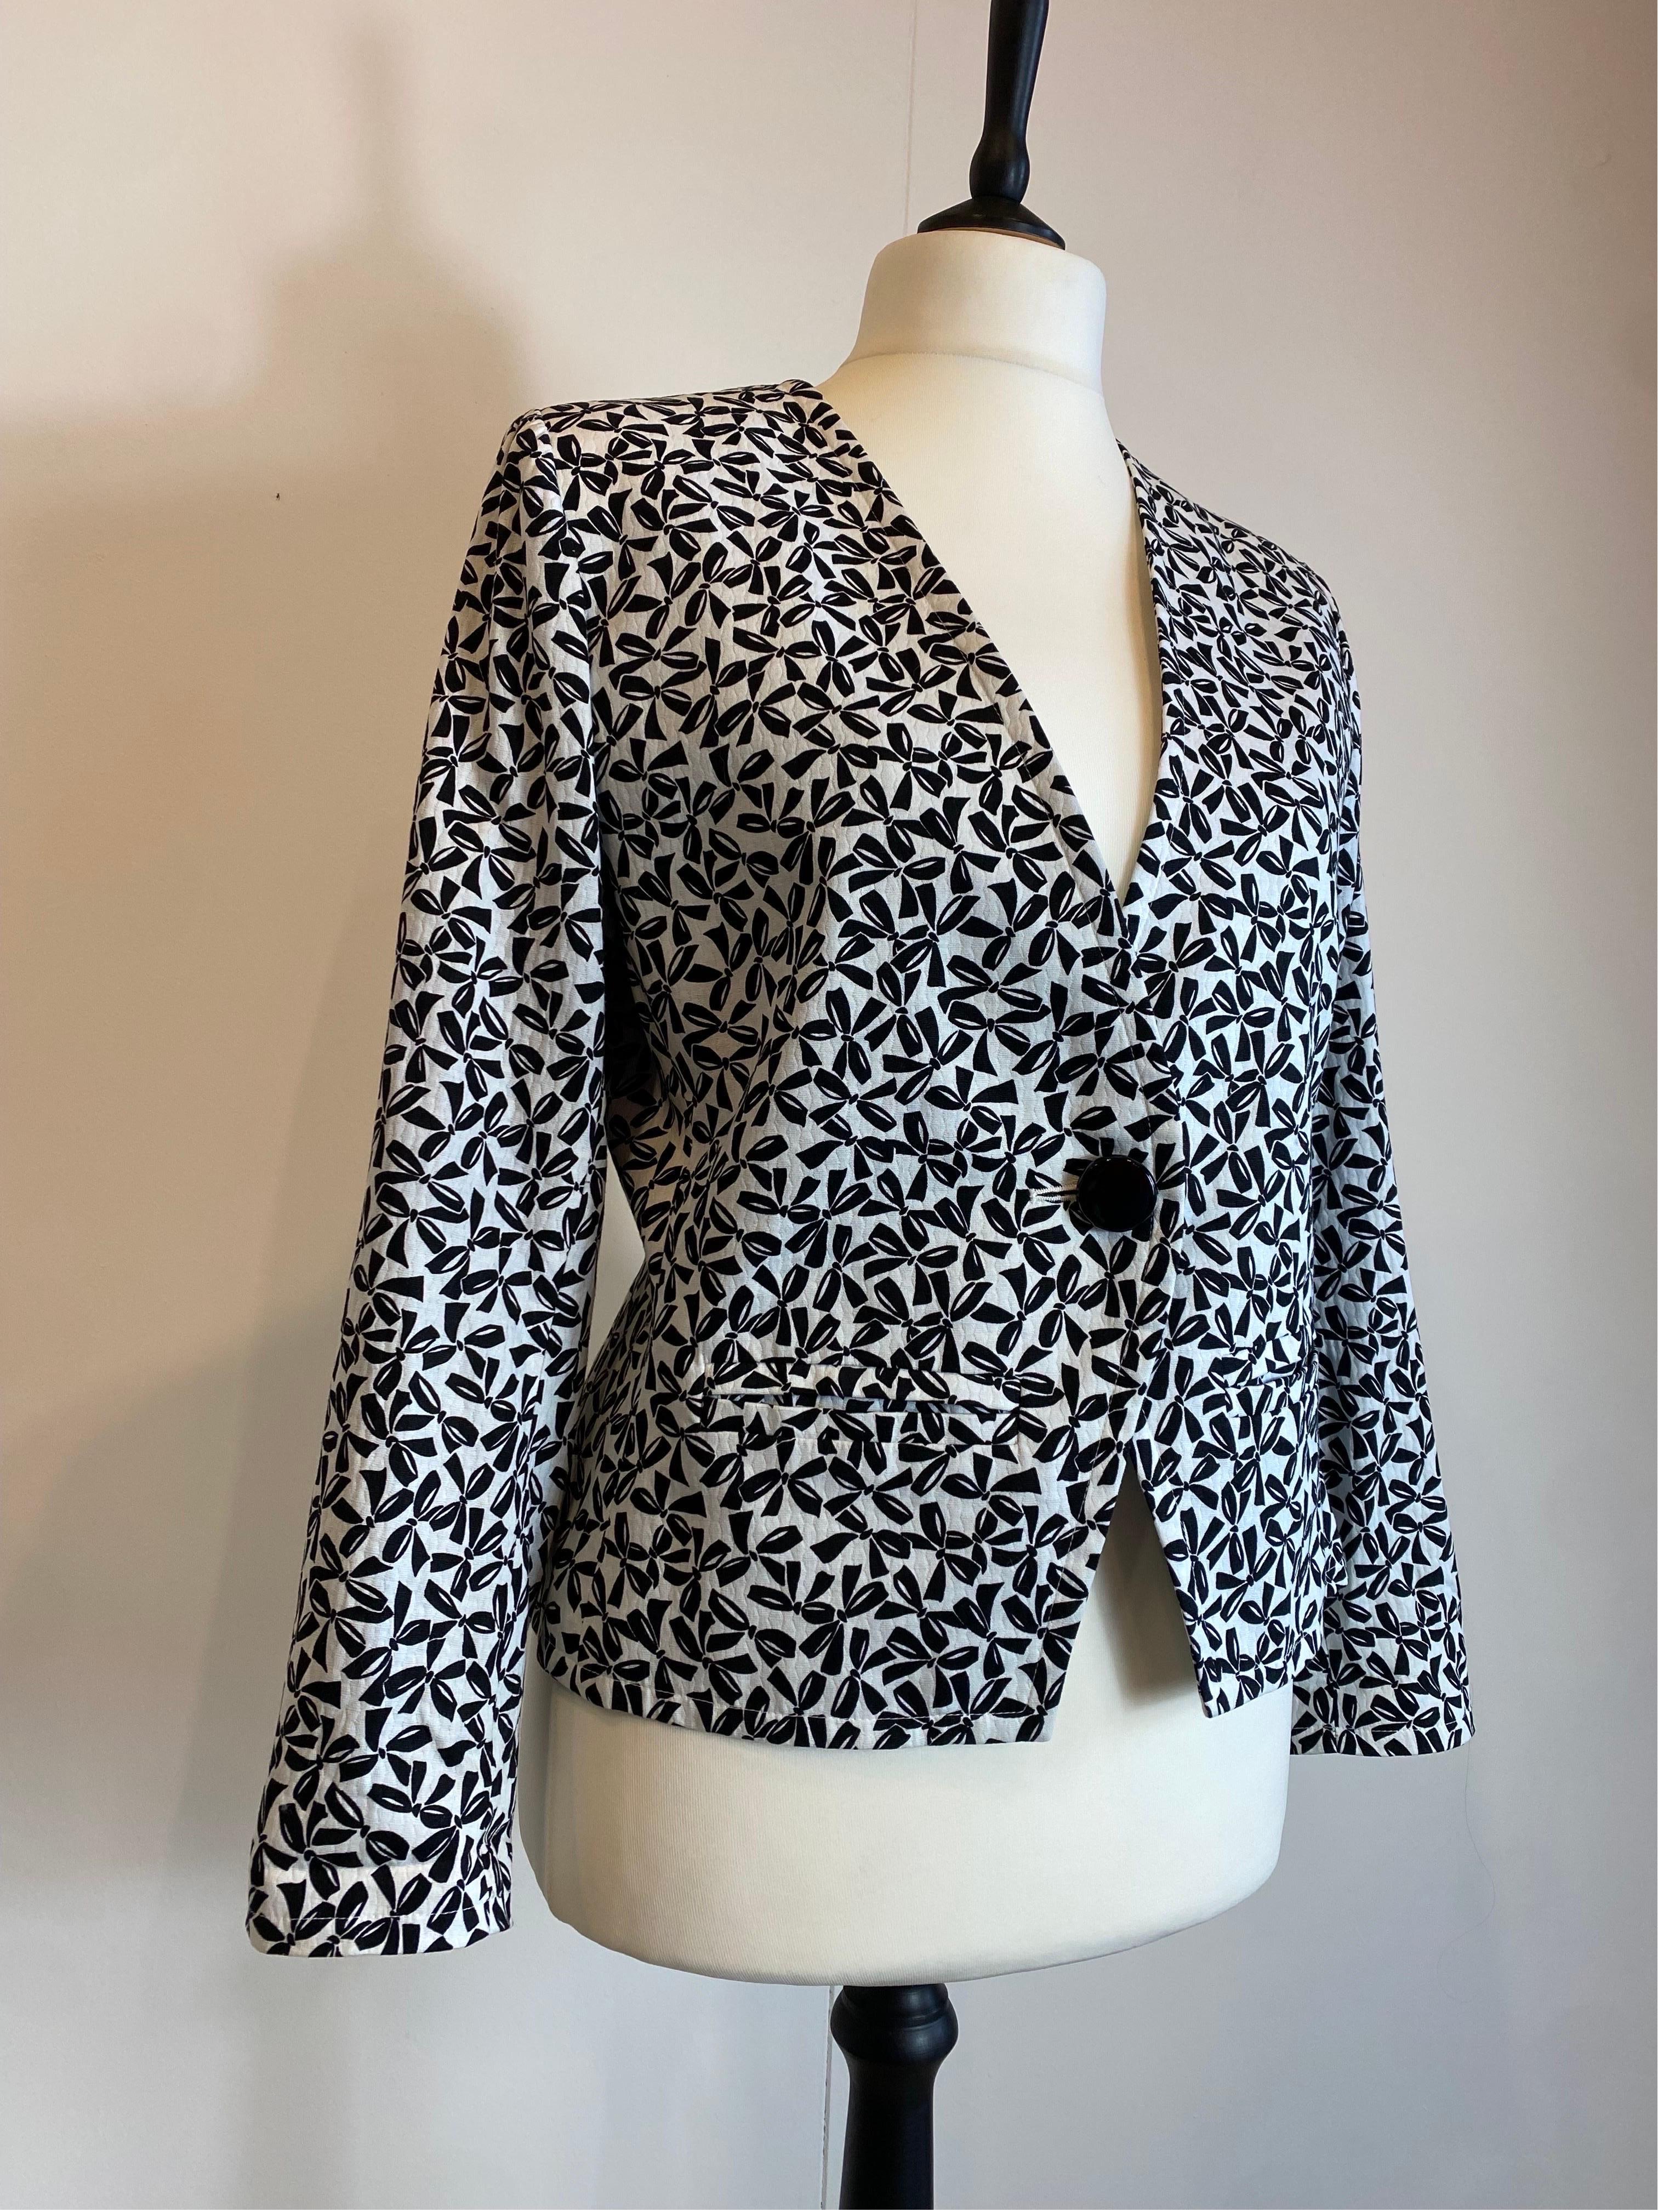 Yves Saint Laurent Vintage Balck and white bows Jacket In Excellent Condition For Sale In Carnate, IT